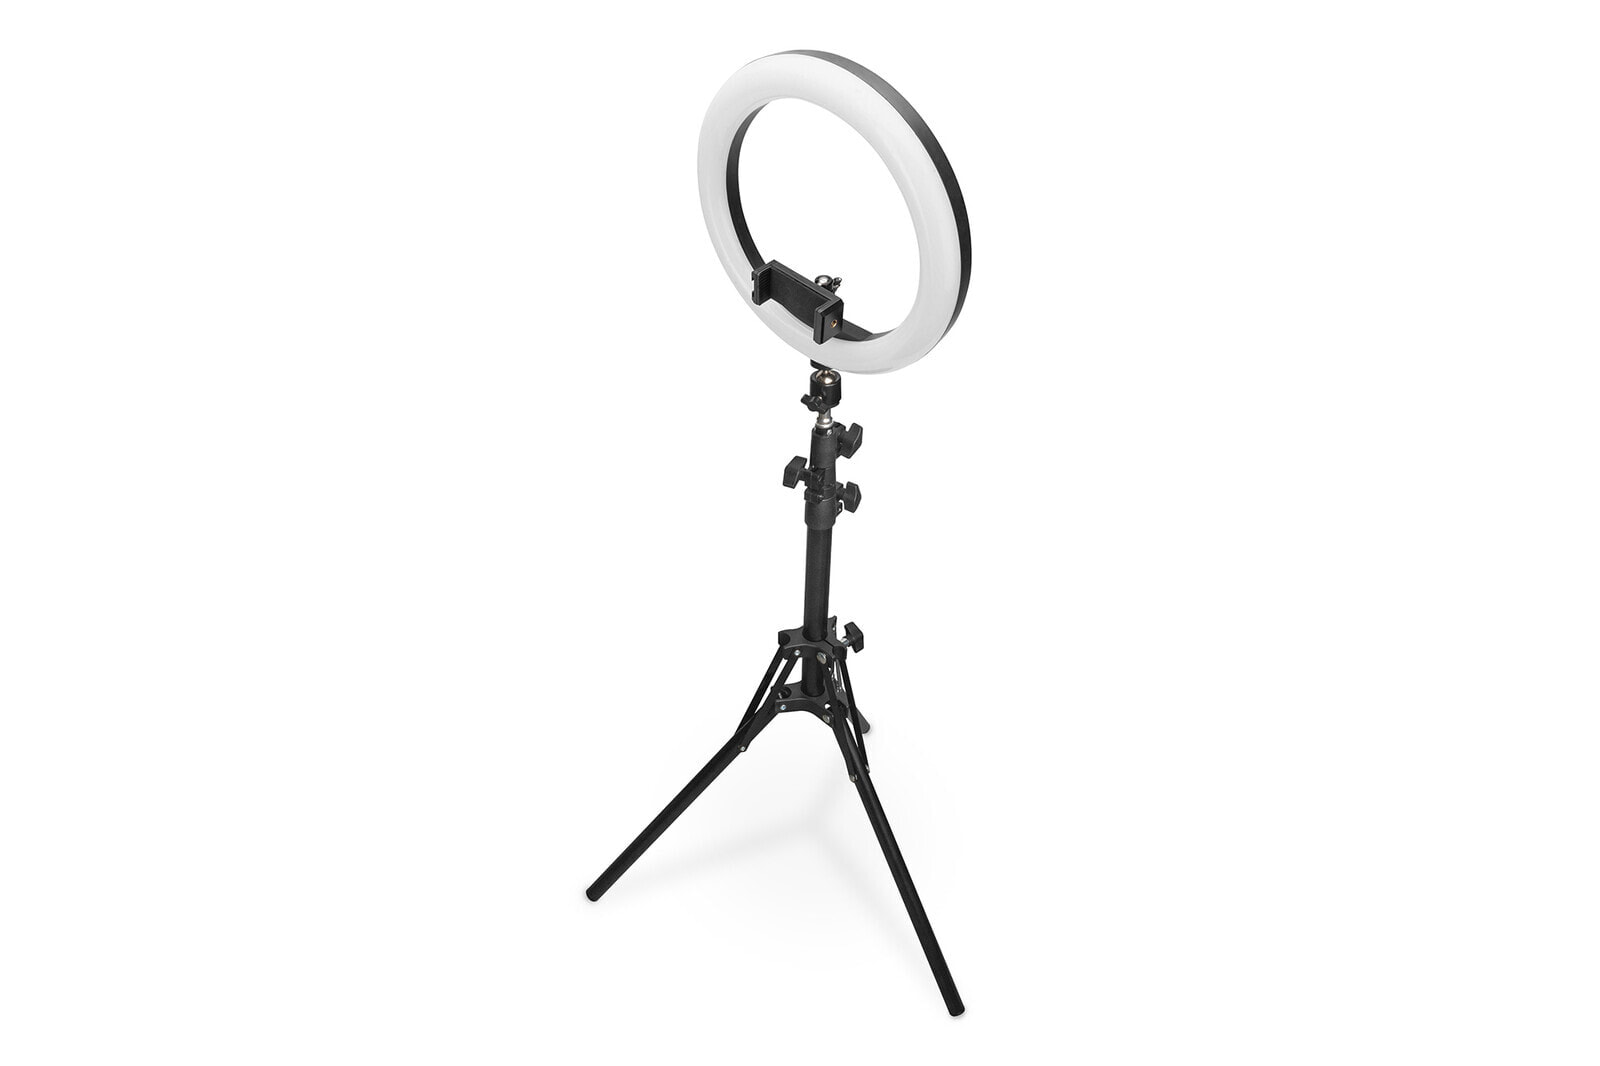 DIGITUS LED Ring Light 10 inch, extendable tripod stand